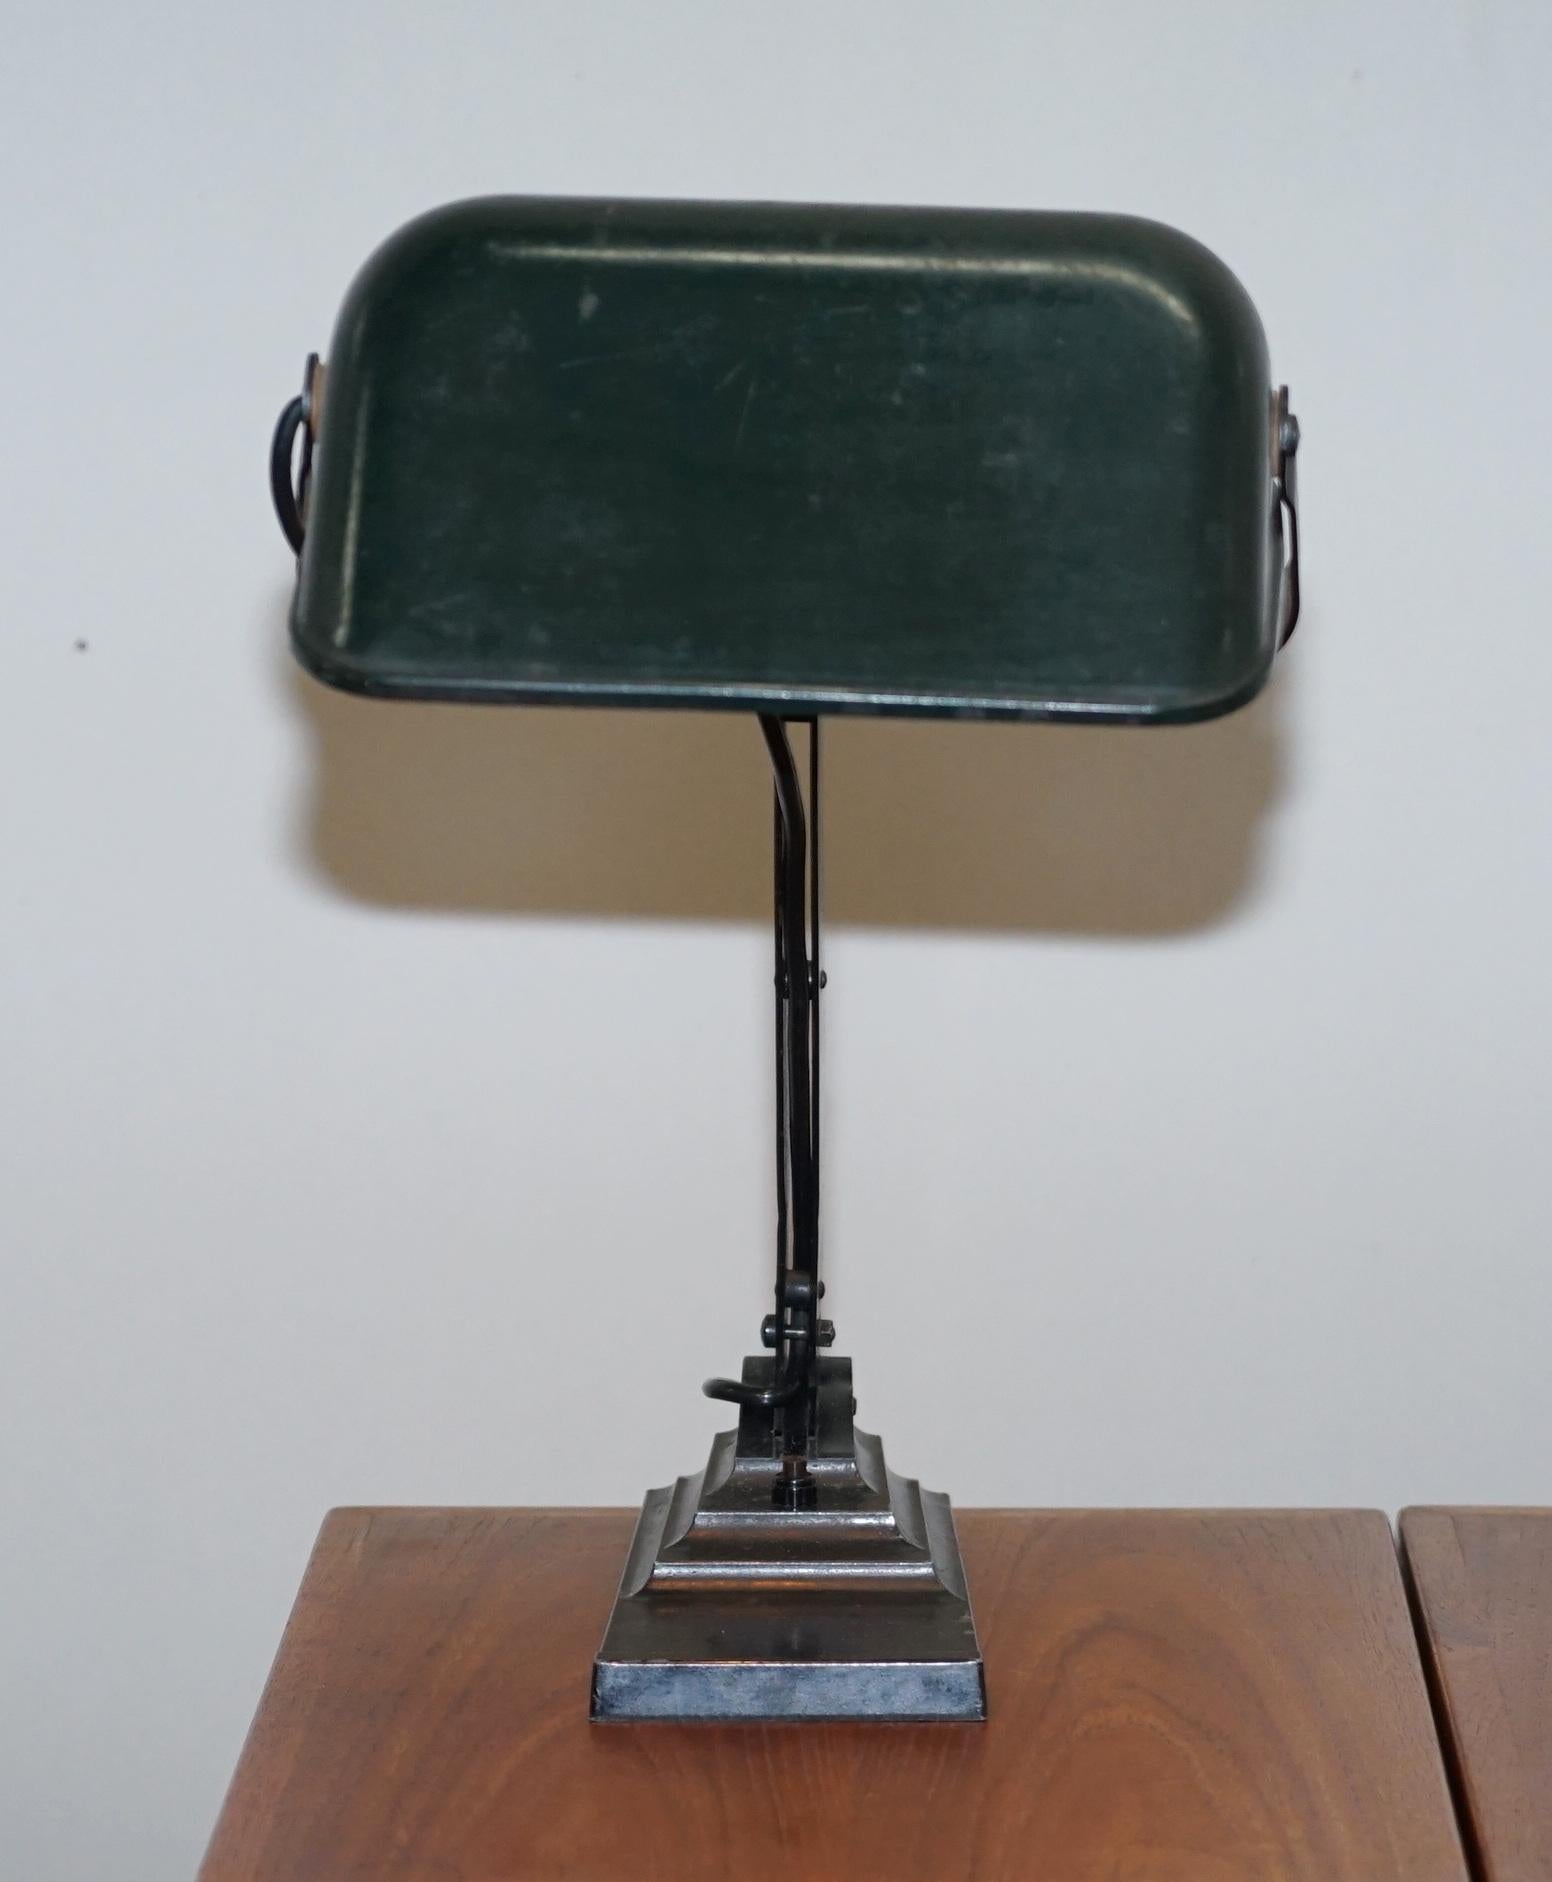 We are delighted to offer this lovely vintage circa 1930s Erpe bankers lamp with three step base and original depression switch

This is one of the coolest and most iconic lamps ever made, it has been seen hundreds of films and been replicated for